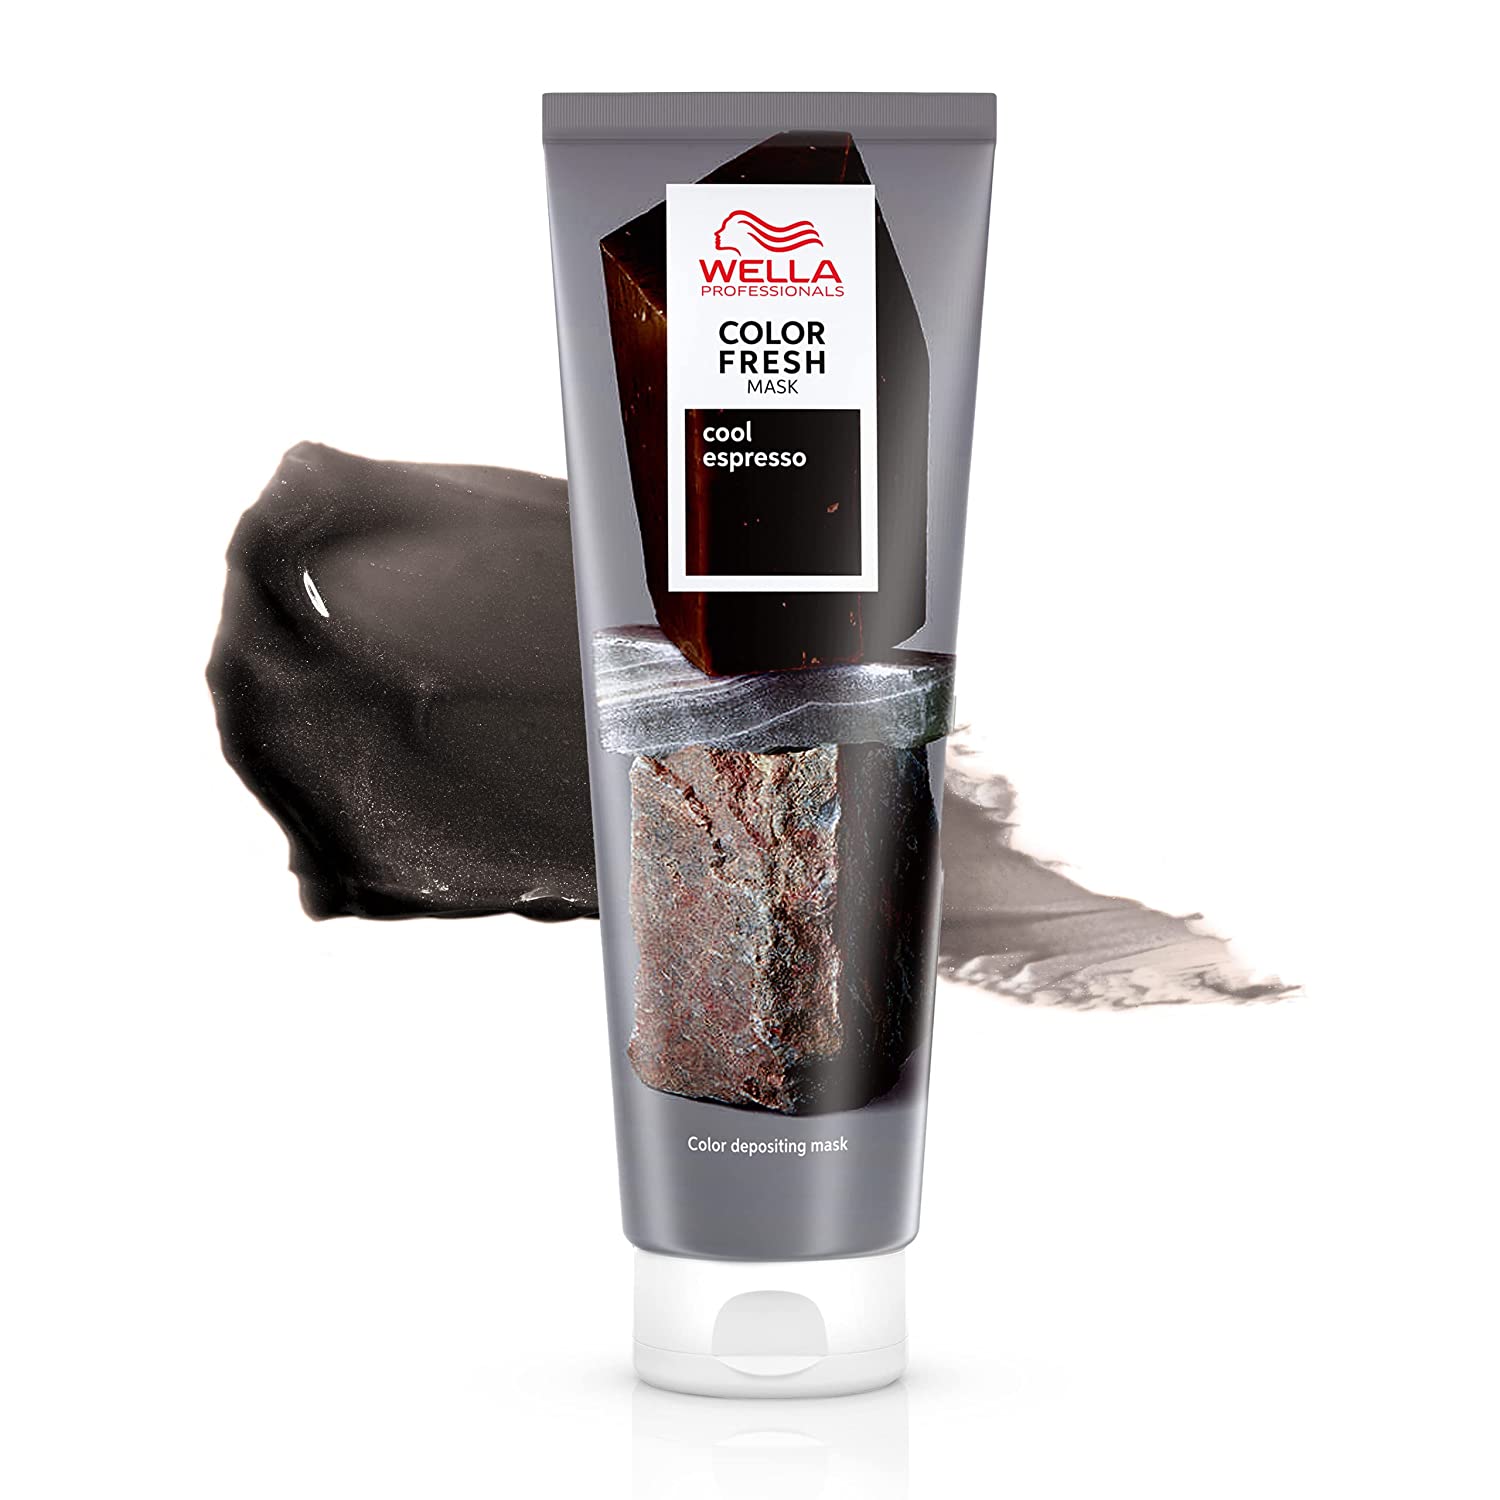 Wella Professionals Color Fresh Mask Cool Espresso - Hair Treatment to Revitalise and Change Hair Colour - Nourishing Tint with Avocado Oil - for Dark and Black Hair - 150 ml, ‎cool